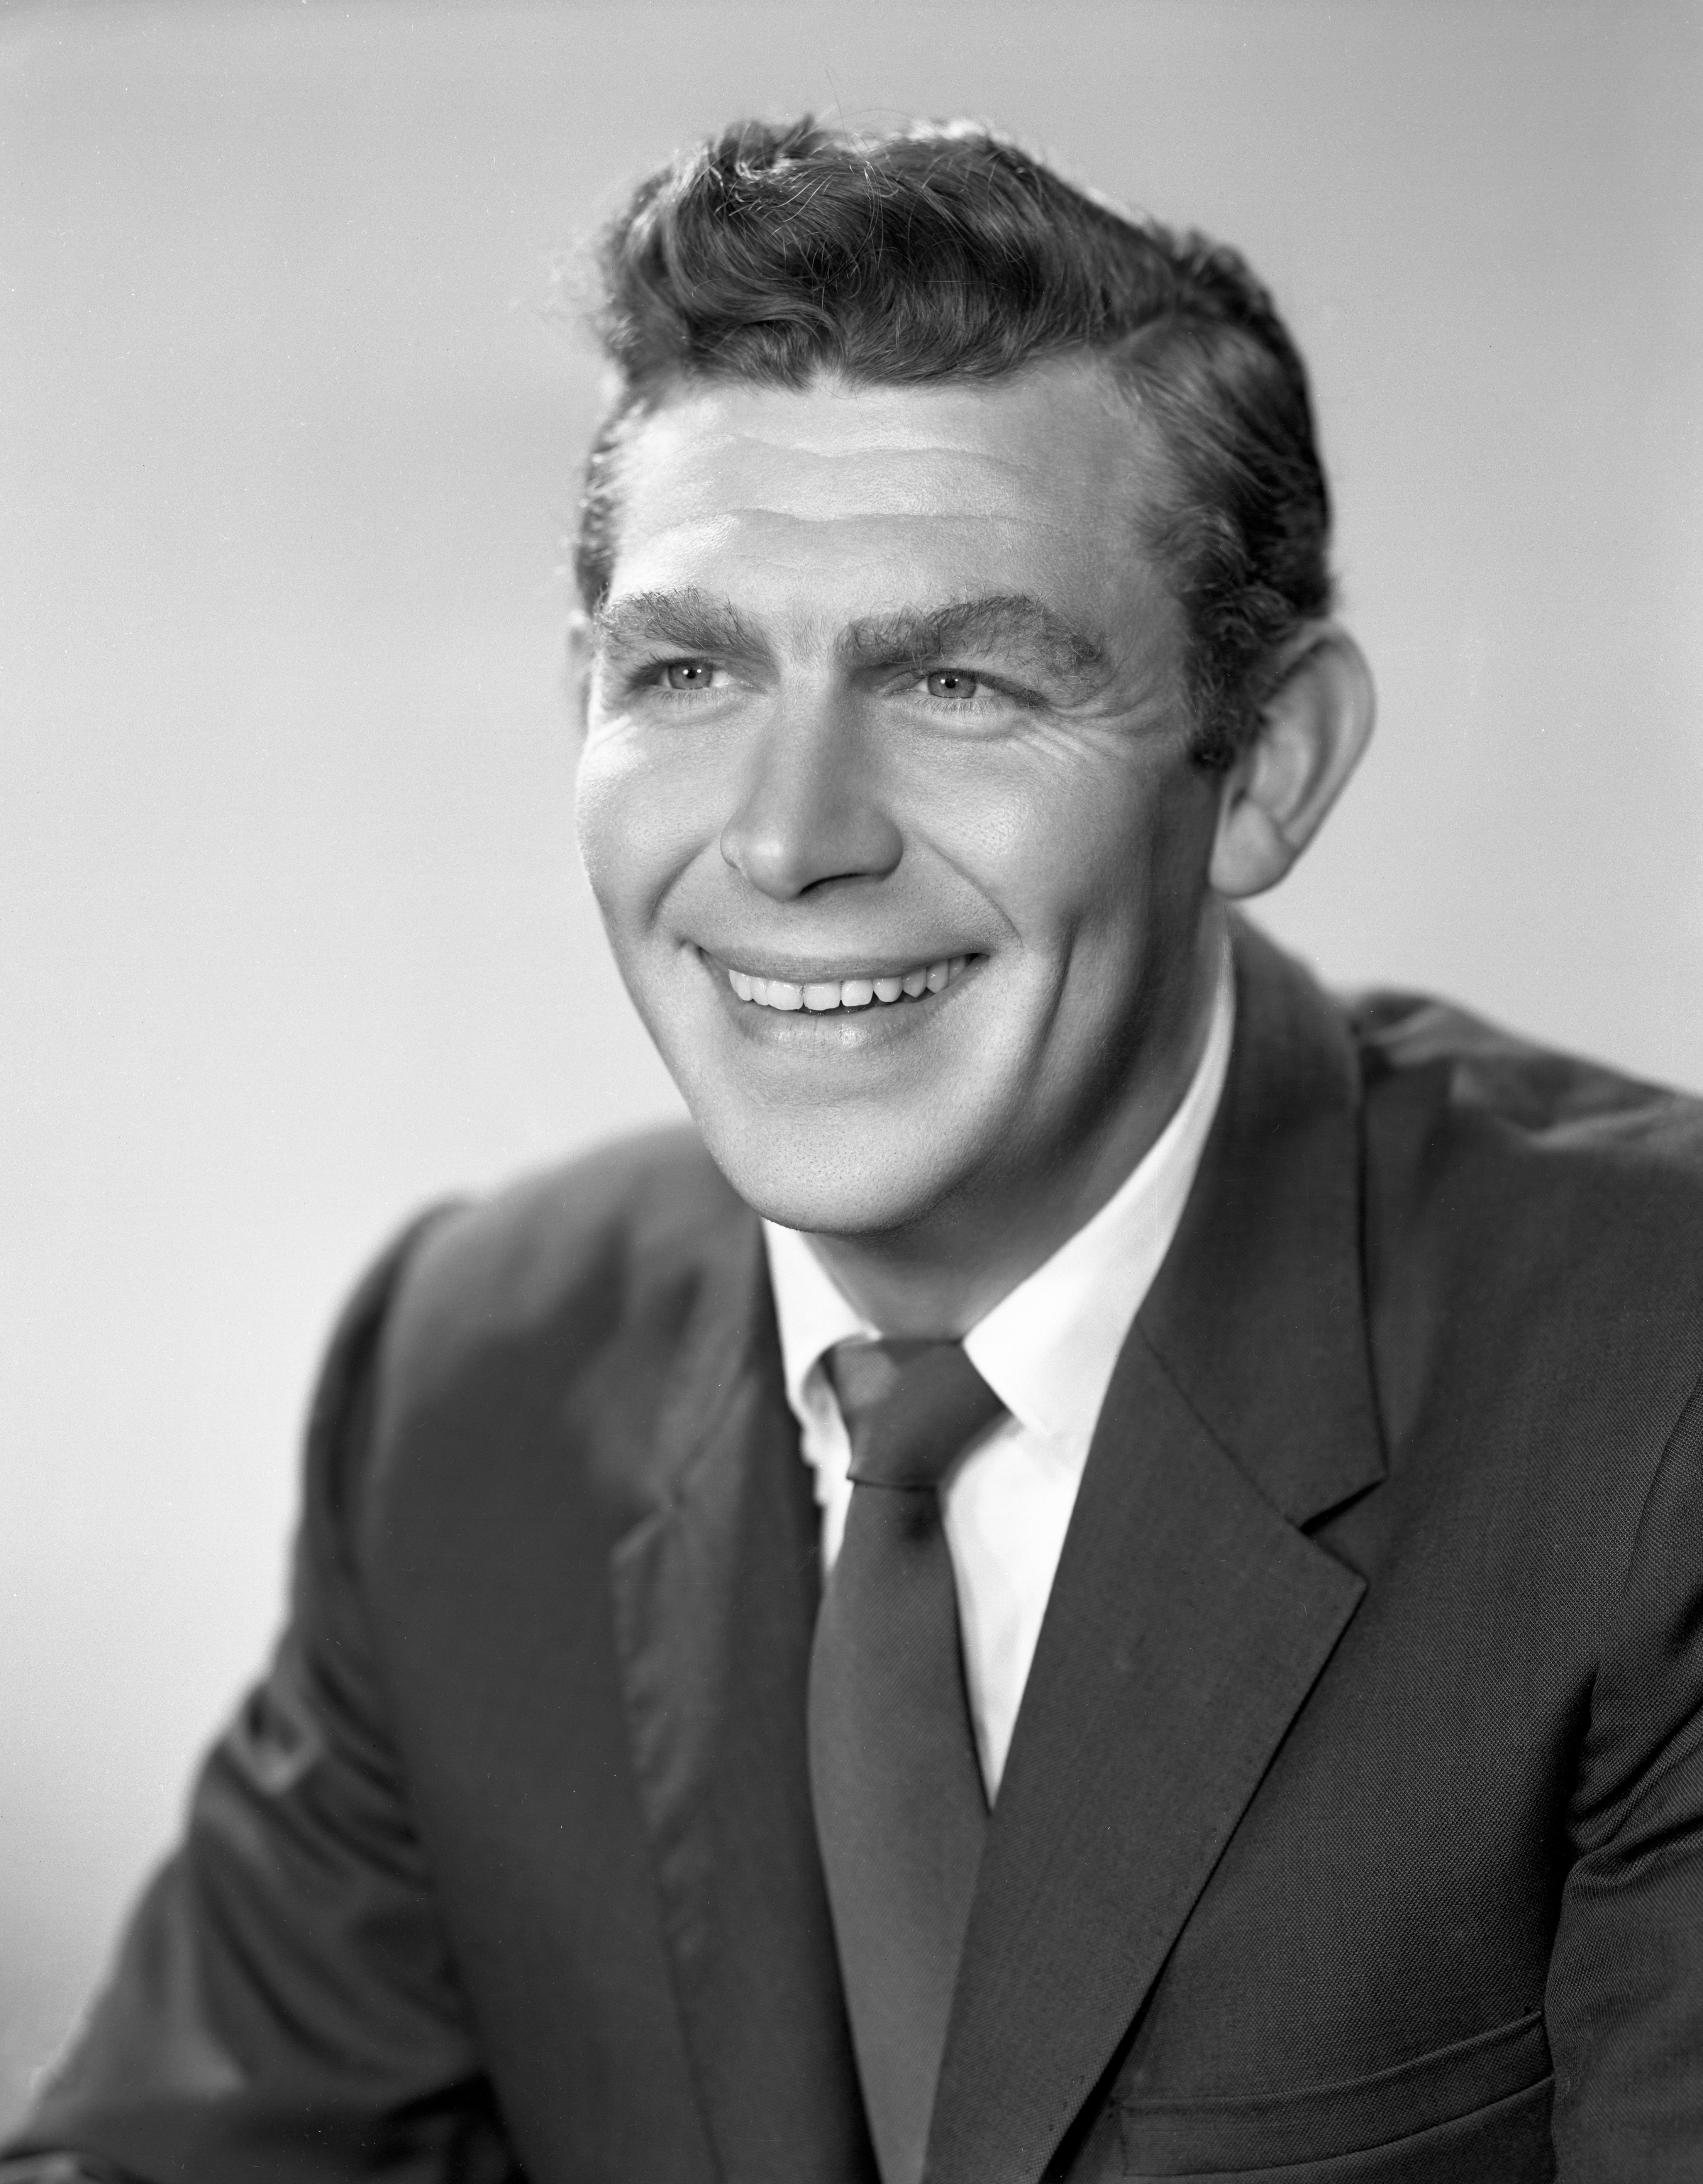 Portrait of CBS television actor Andy Griffith on June 16, 1959. | Source: Getty Images